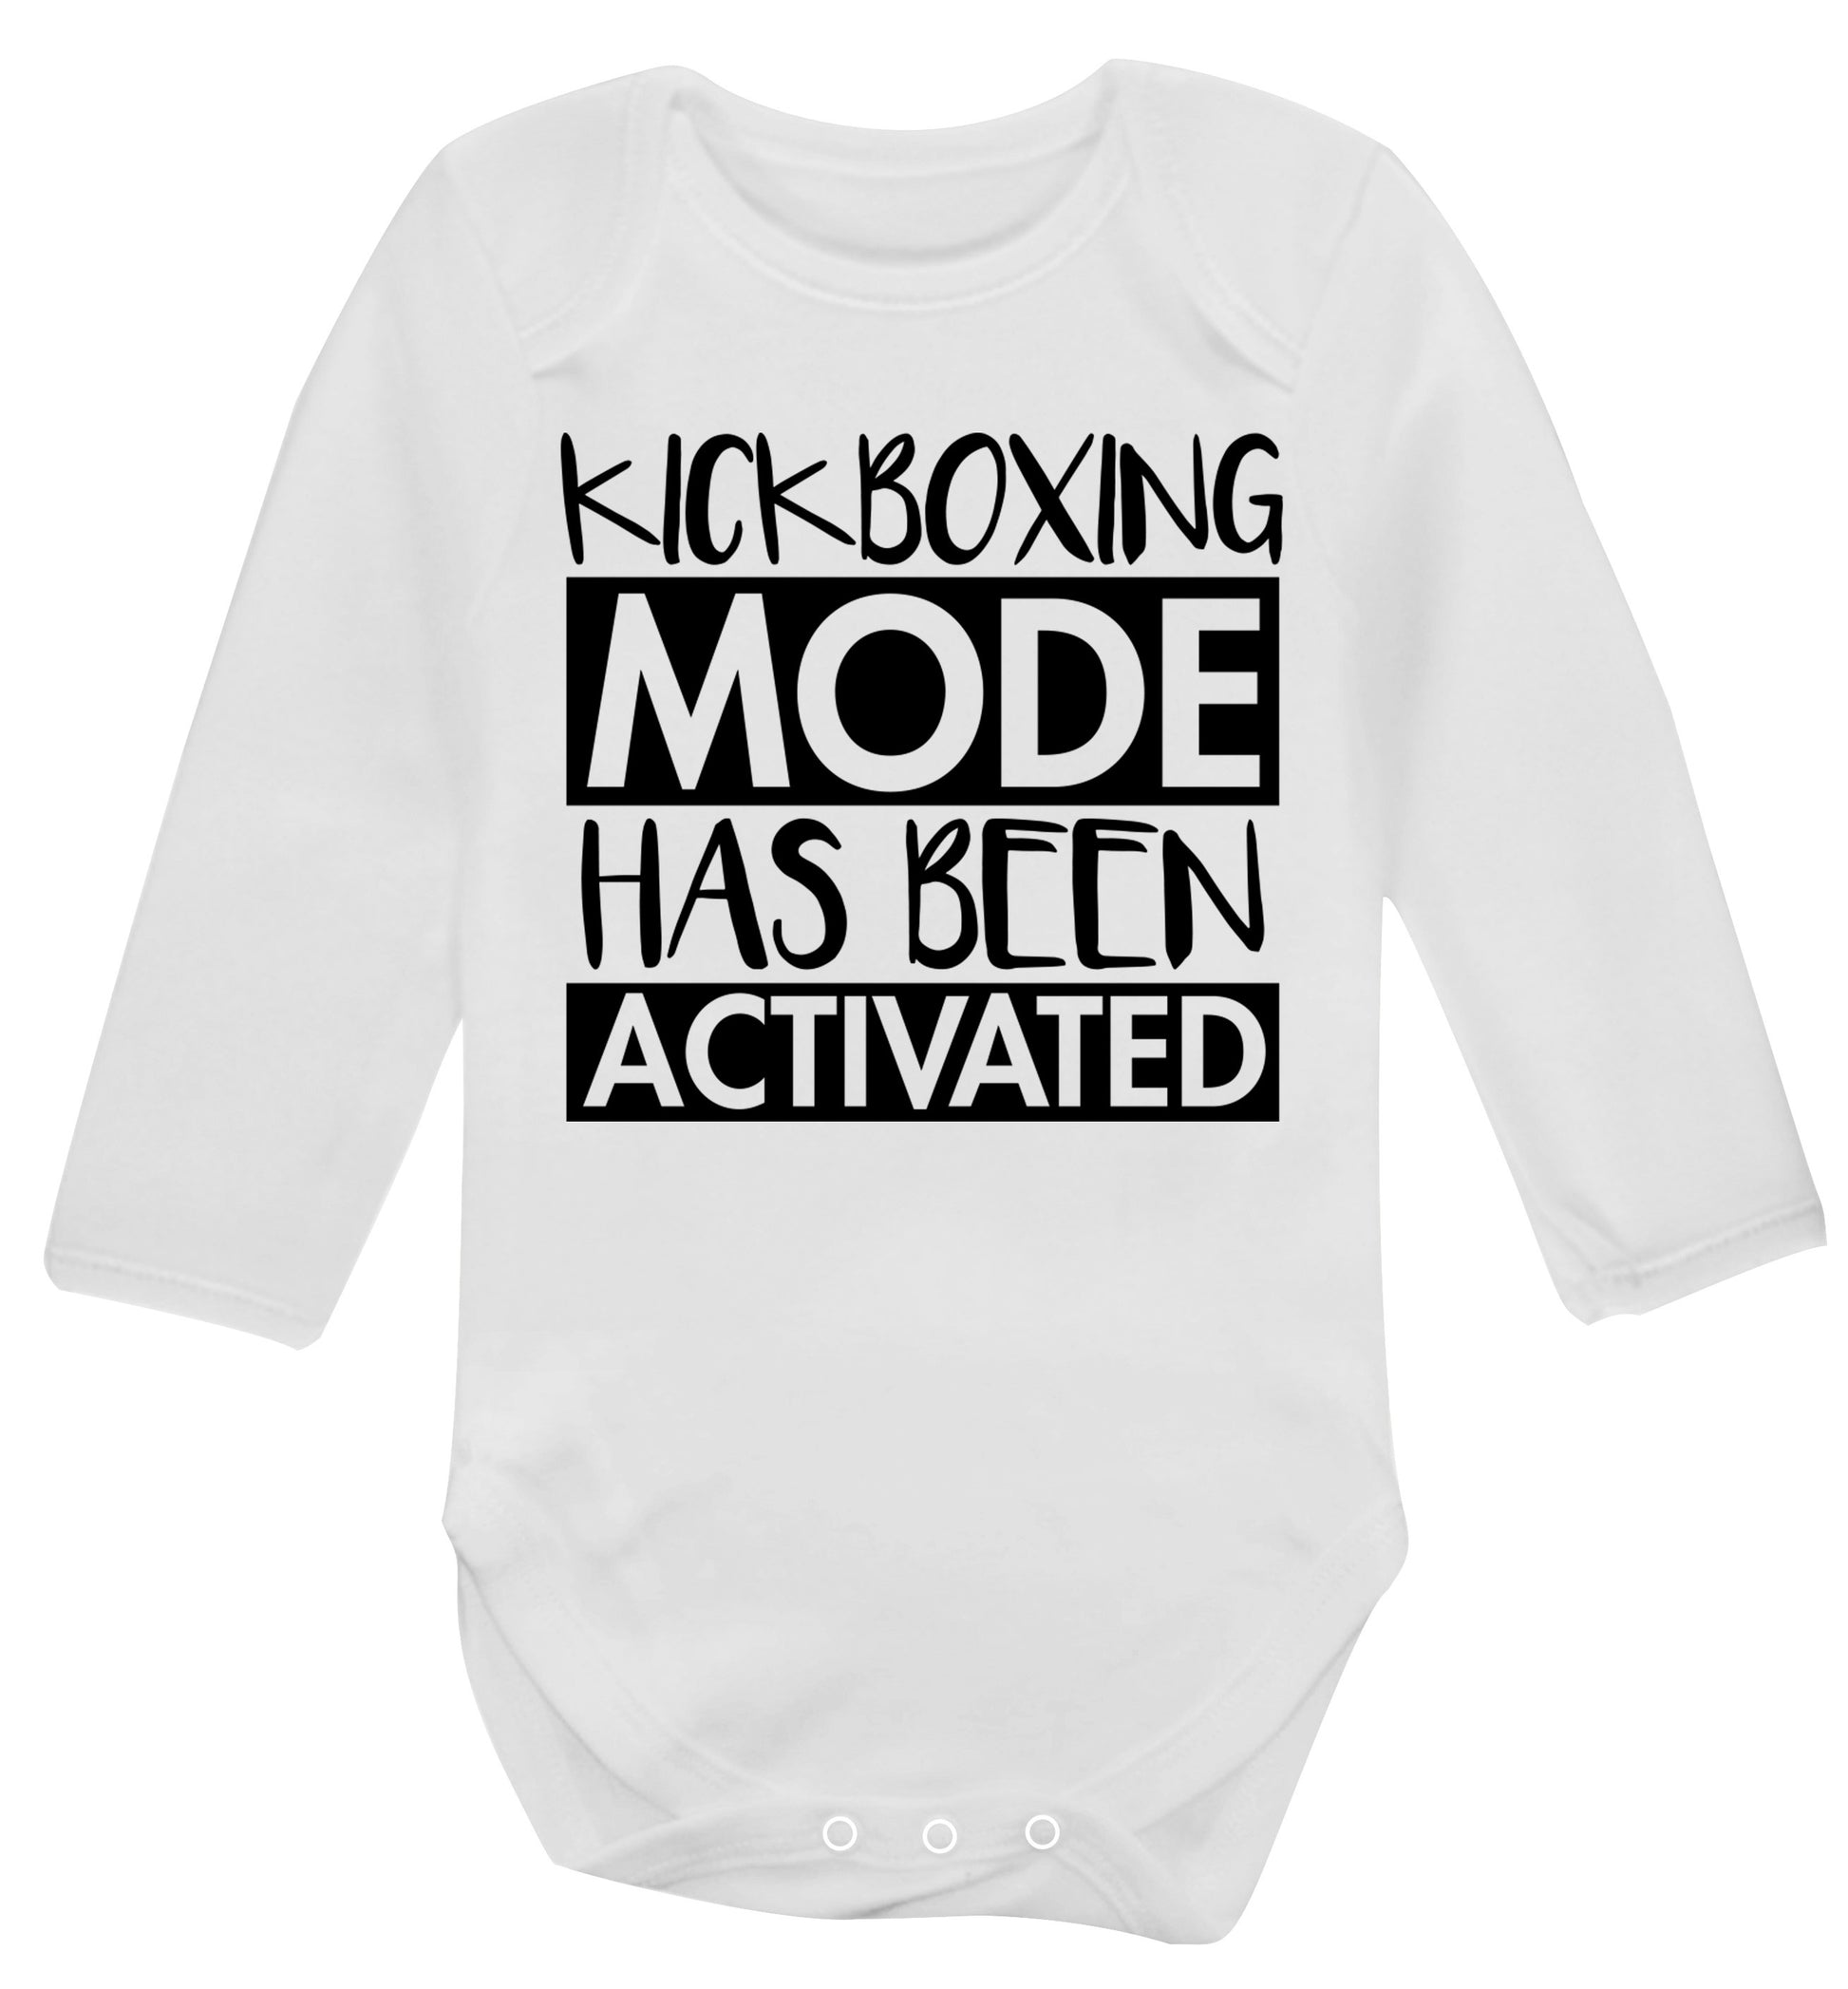 Kickboxing mode activated Baby Vest long sleeved white 6-12 months